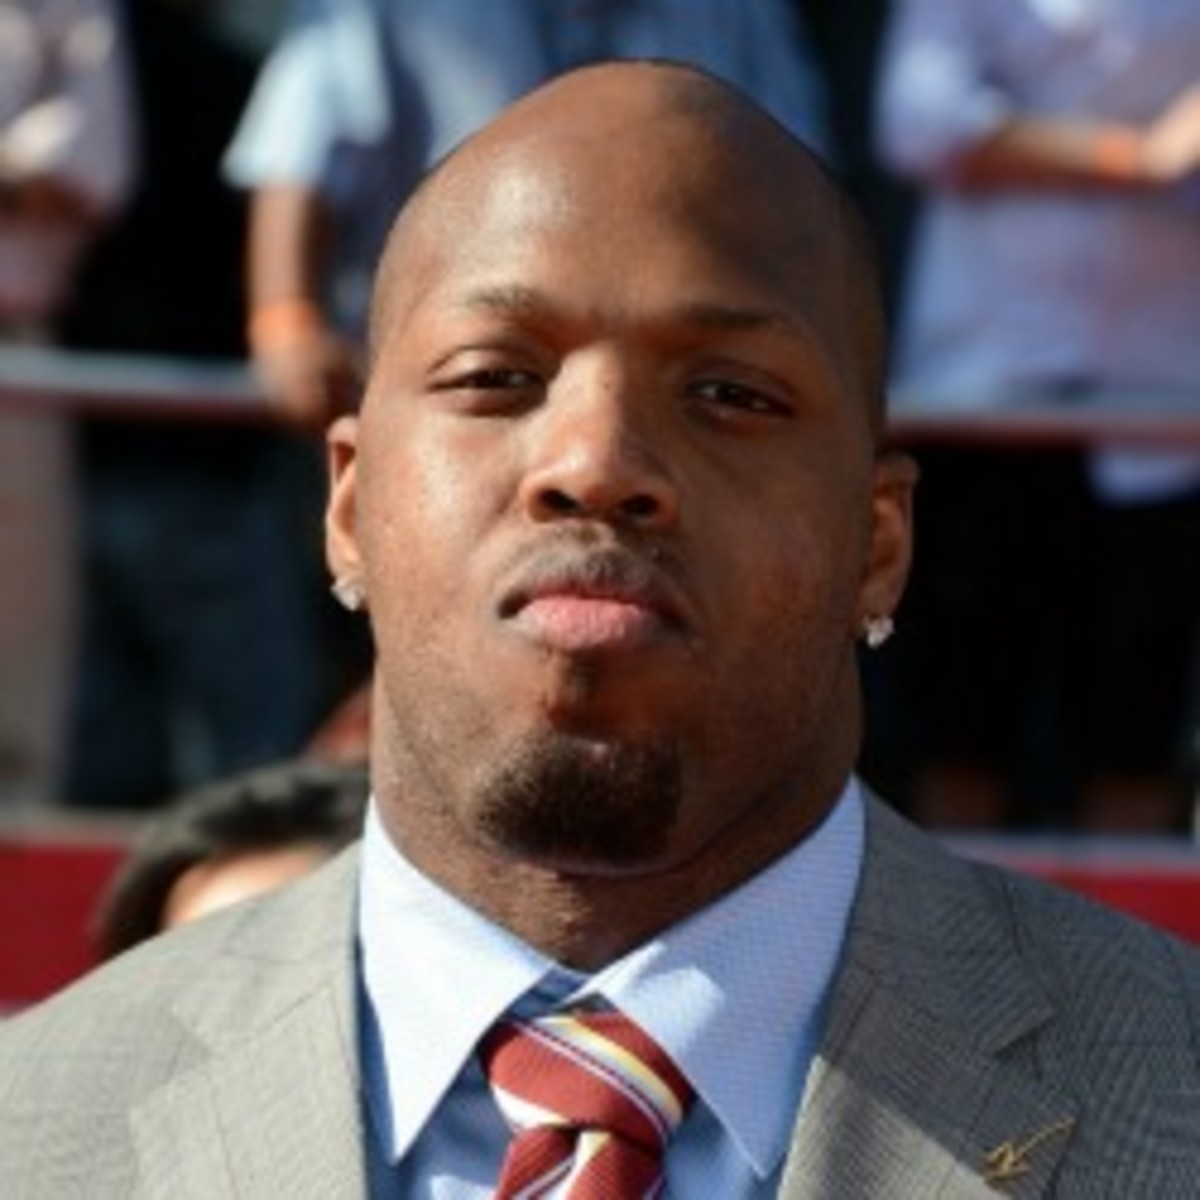 Terrell Suggs reportedly surrendered nine firearms  to the authorities in November. (Frazer Harrison/Getty Images)